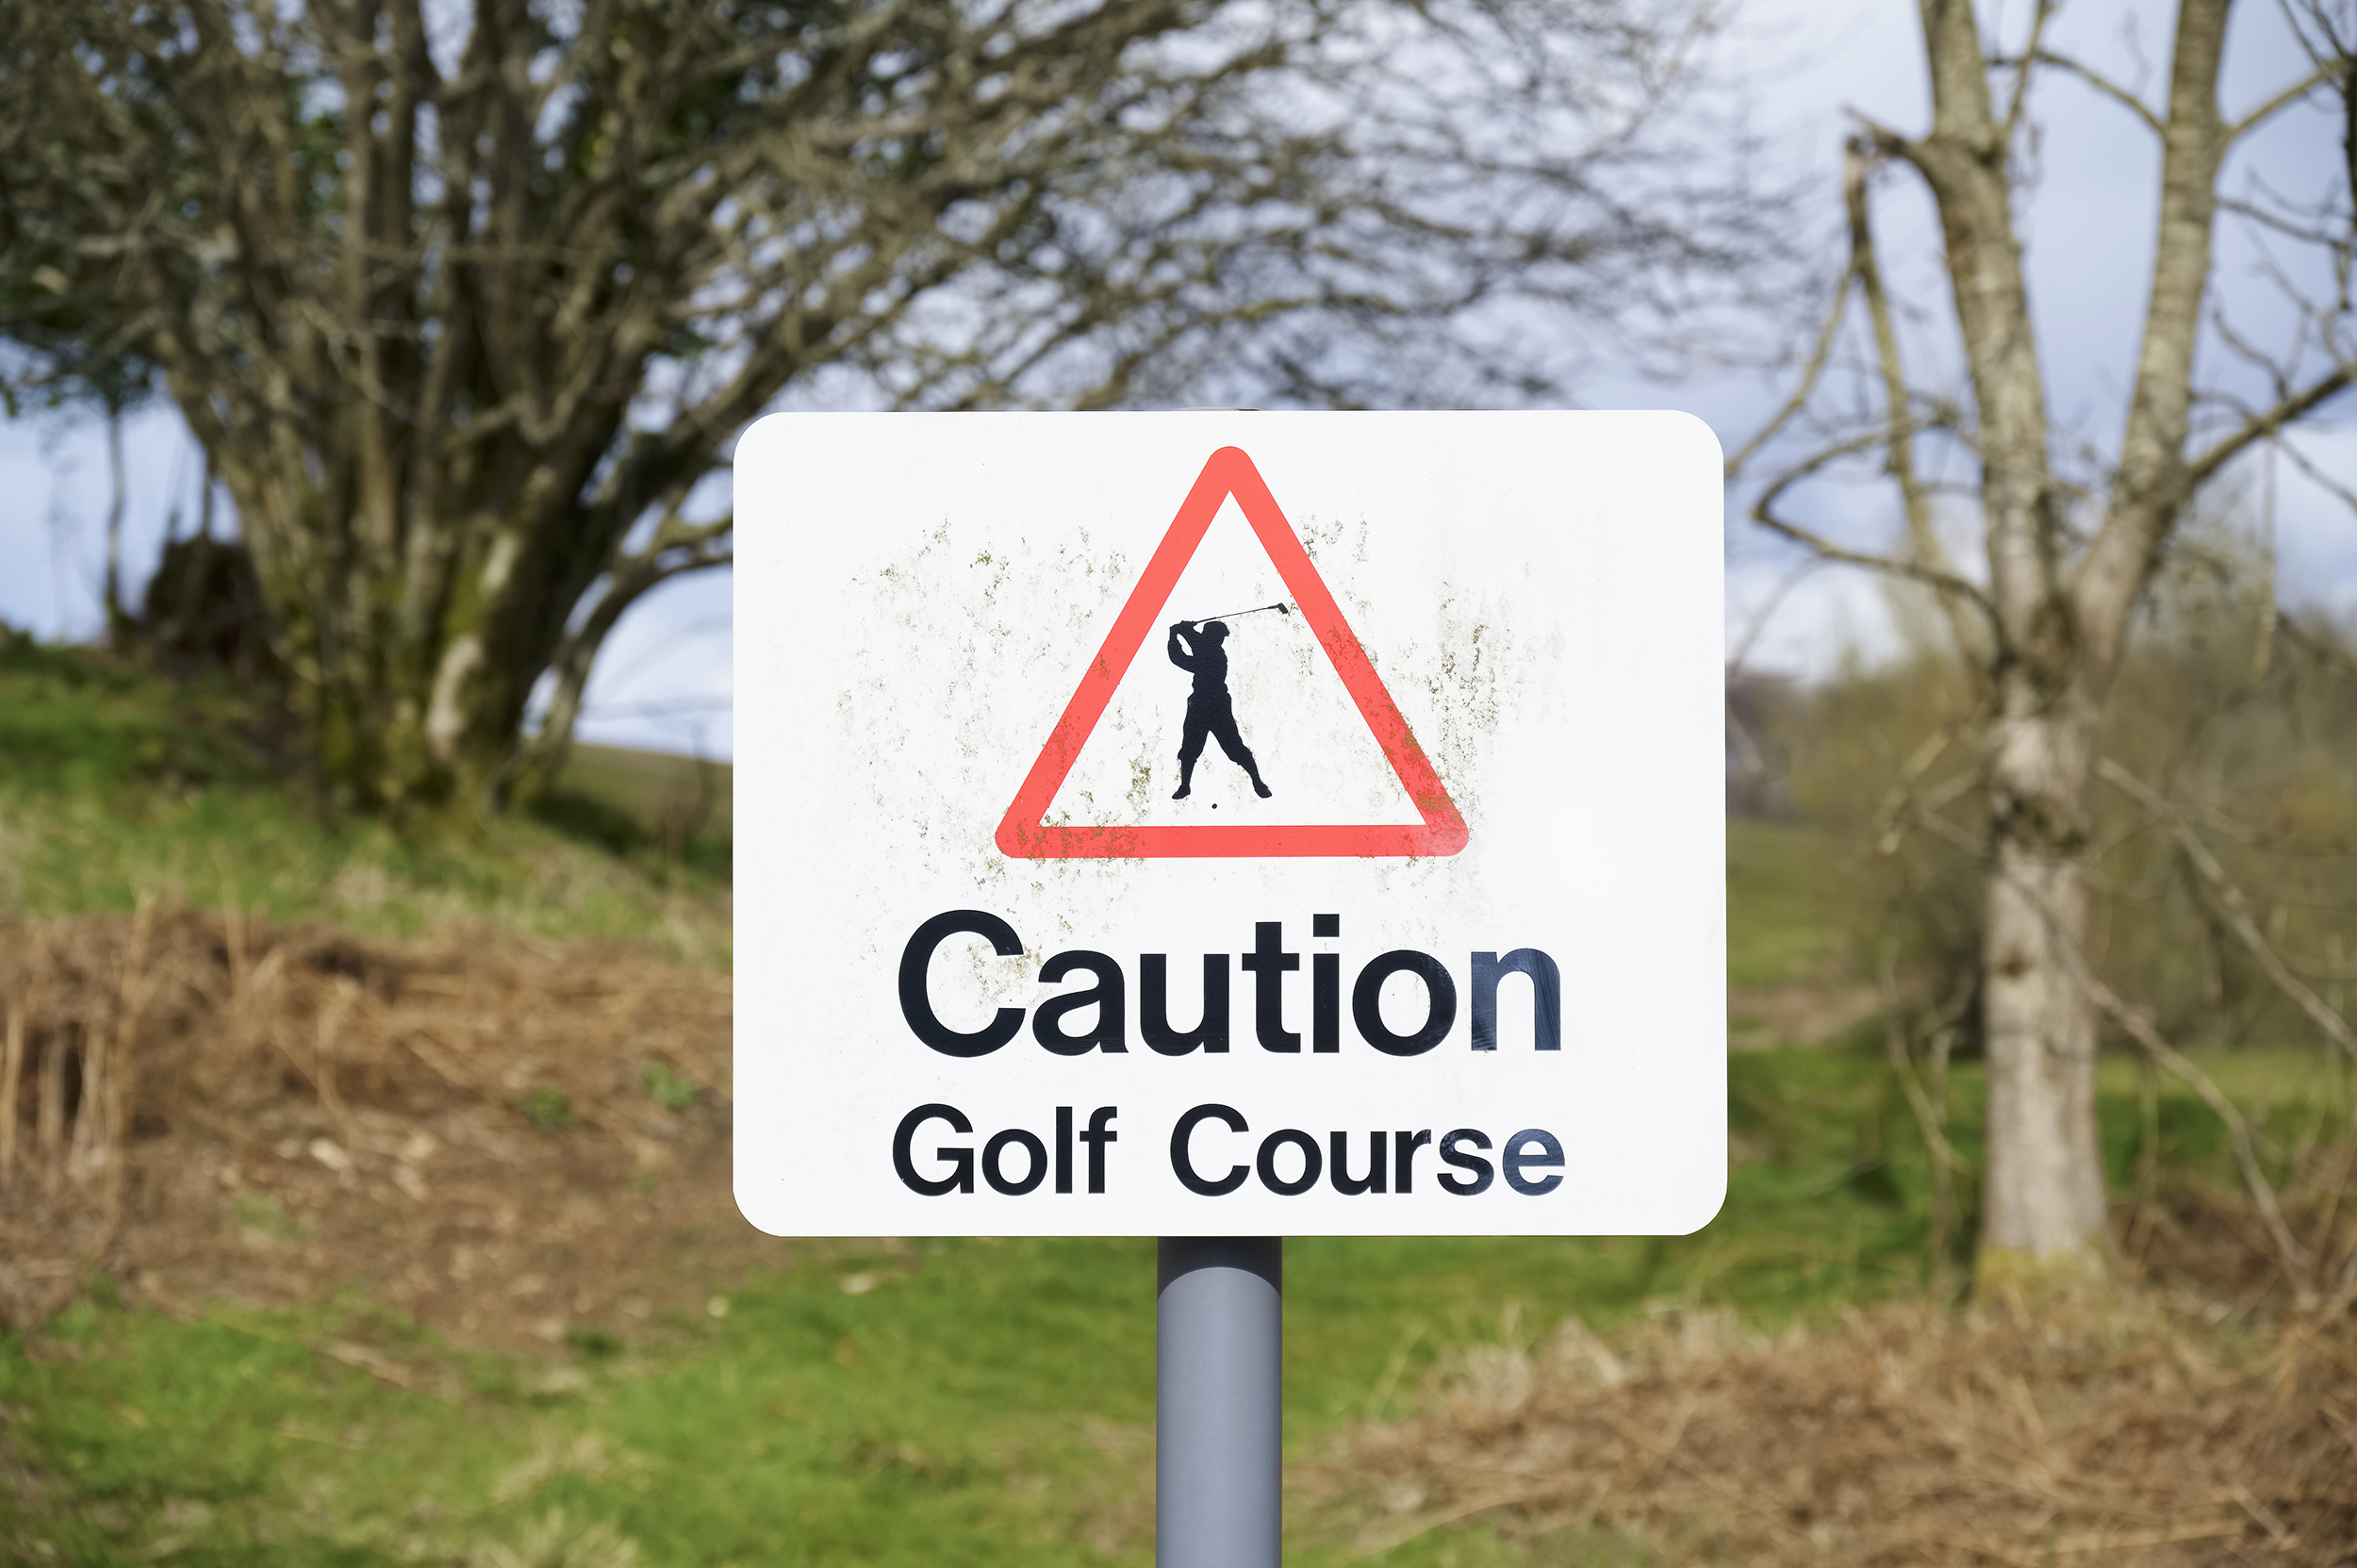 Beware of golf balls sign of the golf course near you